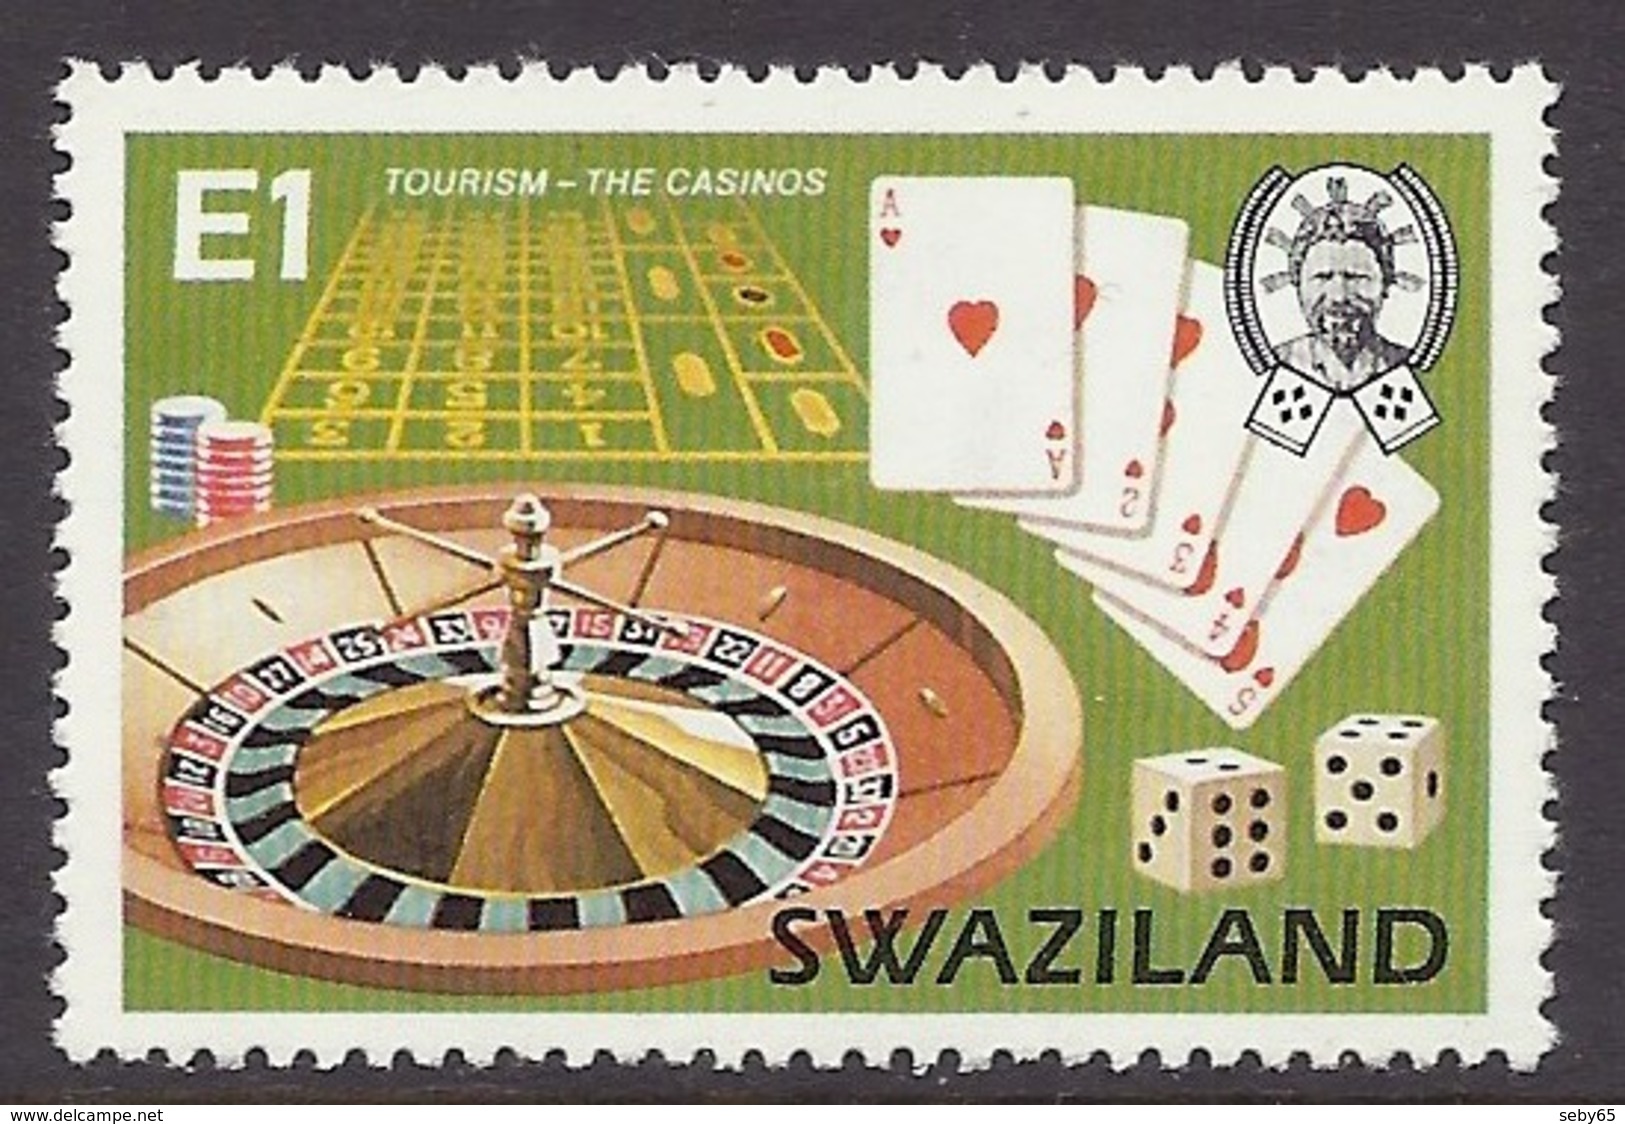 Swaziland 1981 Tourism - The Casinos, Roulette Games, Playing Cards MNH - Swaziland (1968-...)